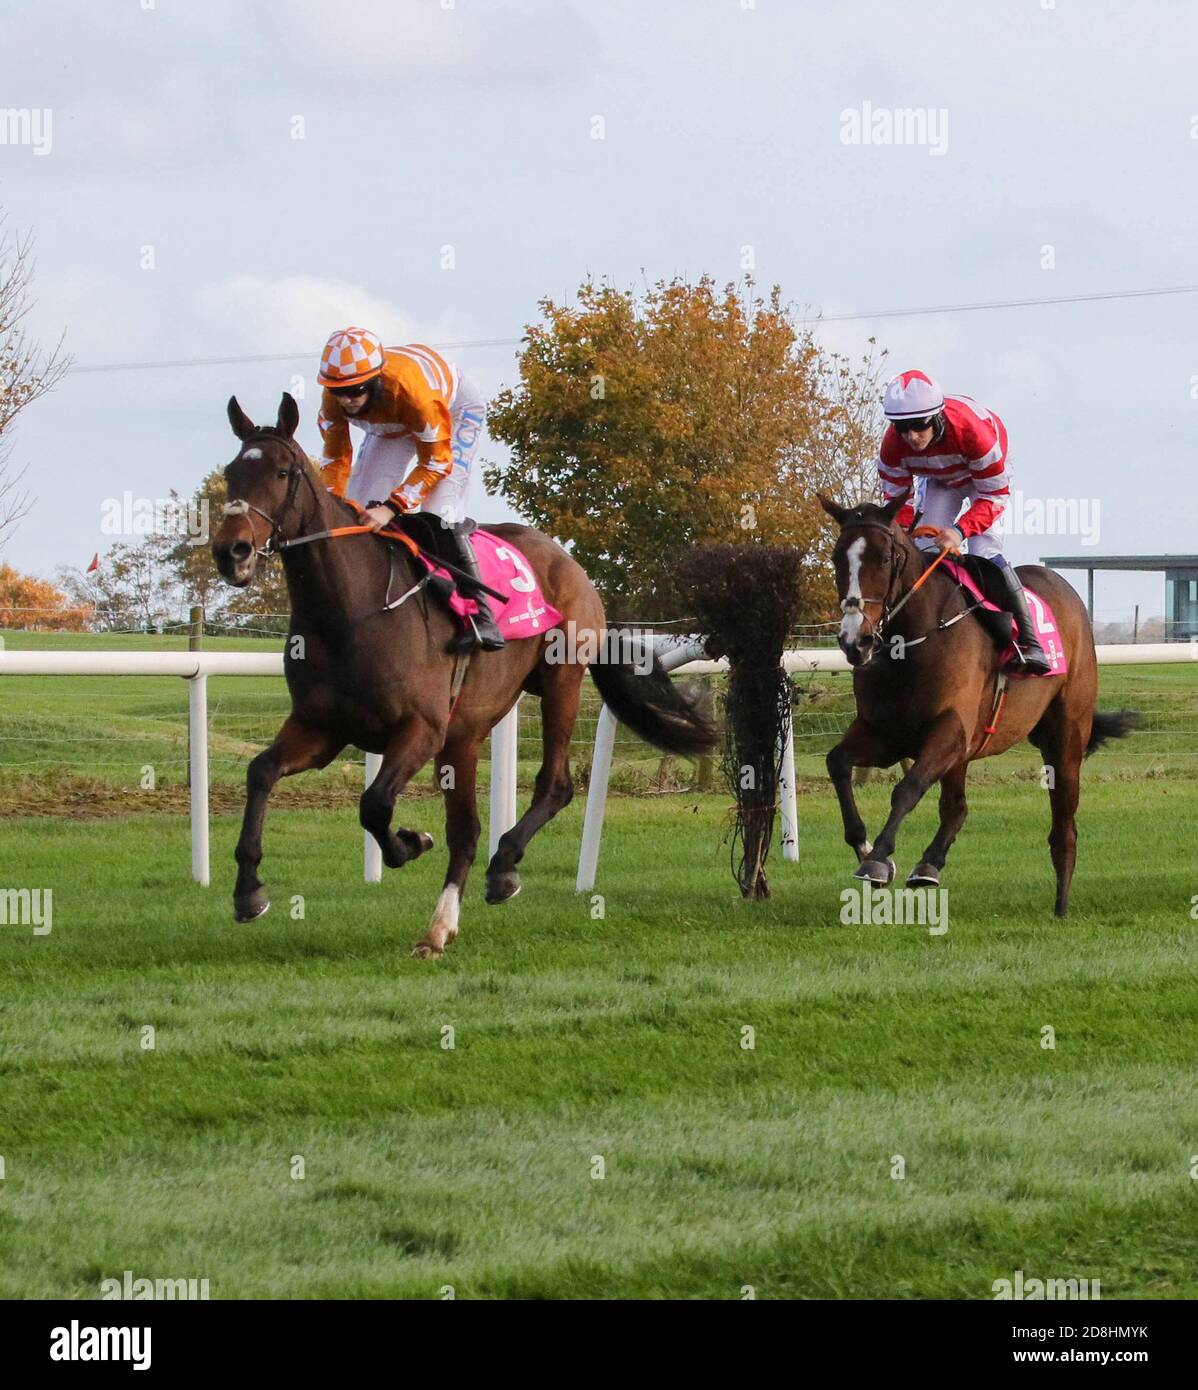 Down Royal Racecourse, Lisburn, Northern Ireland. 30 Oct 2020. The Ladbrokes Festival of Racing (Day 1) got underway today. The feature race of the day was the WKD Hurdle (Grade 2) with just under £36,000 for the winner. The race was won by Aspire Tower (3 – orange top) ridden by Rachael Blackmore and trained by H de Bromhead. Credit: CAZIMB/Alamy Live News. Stock Photo